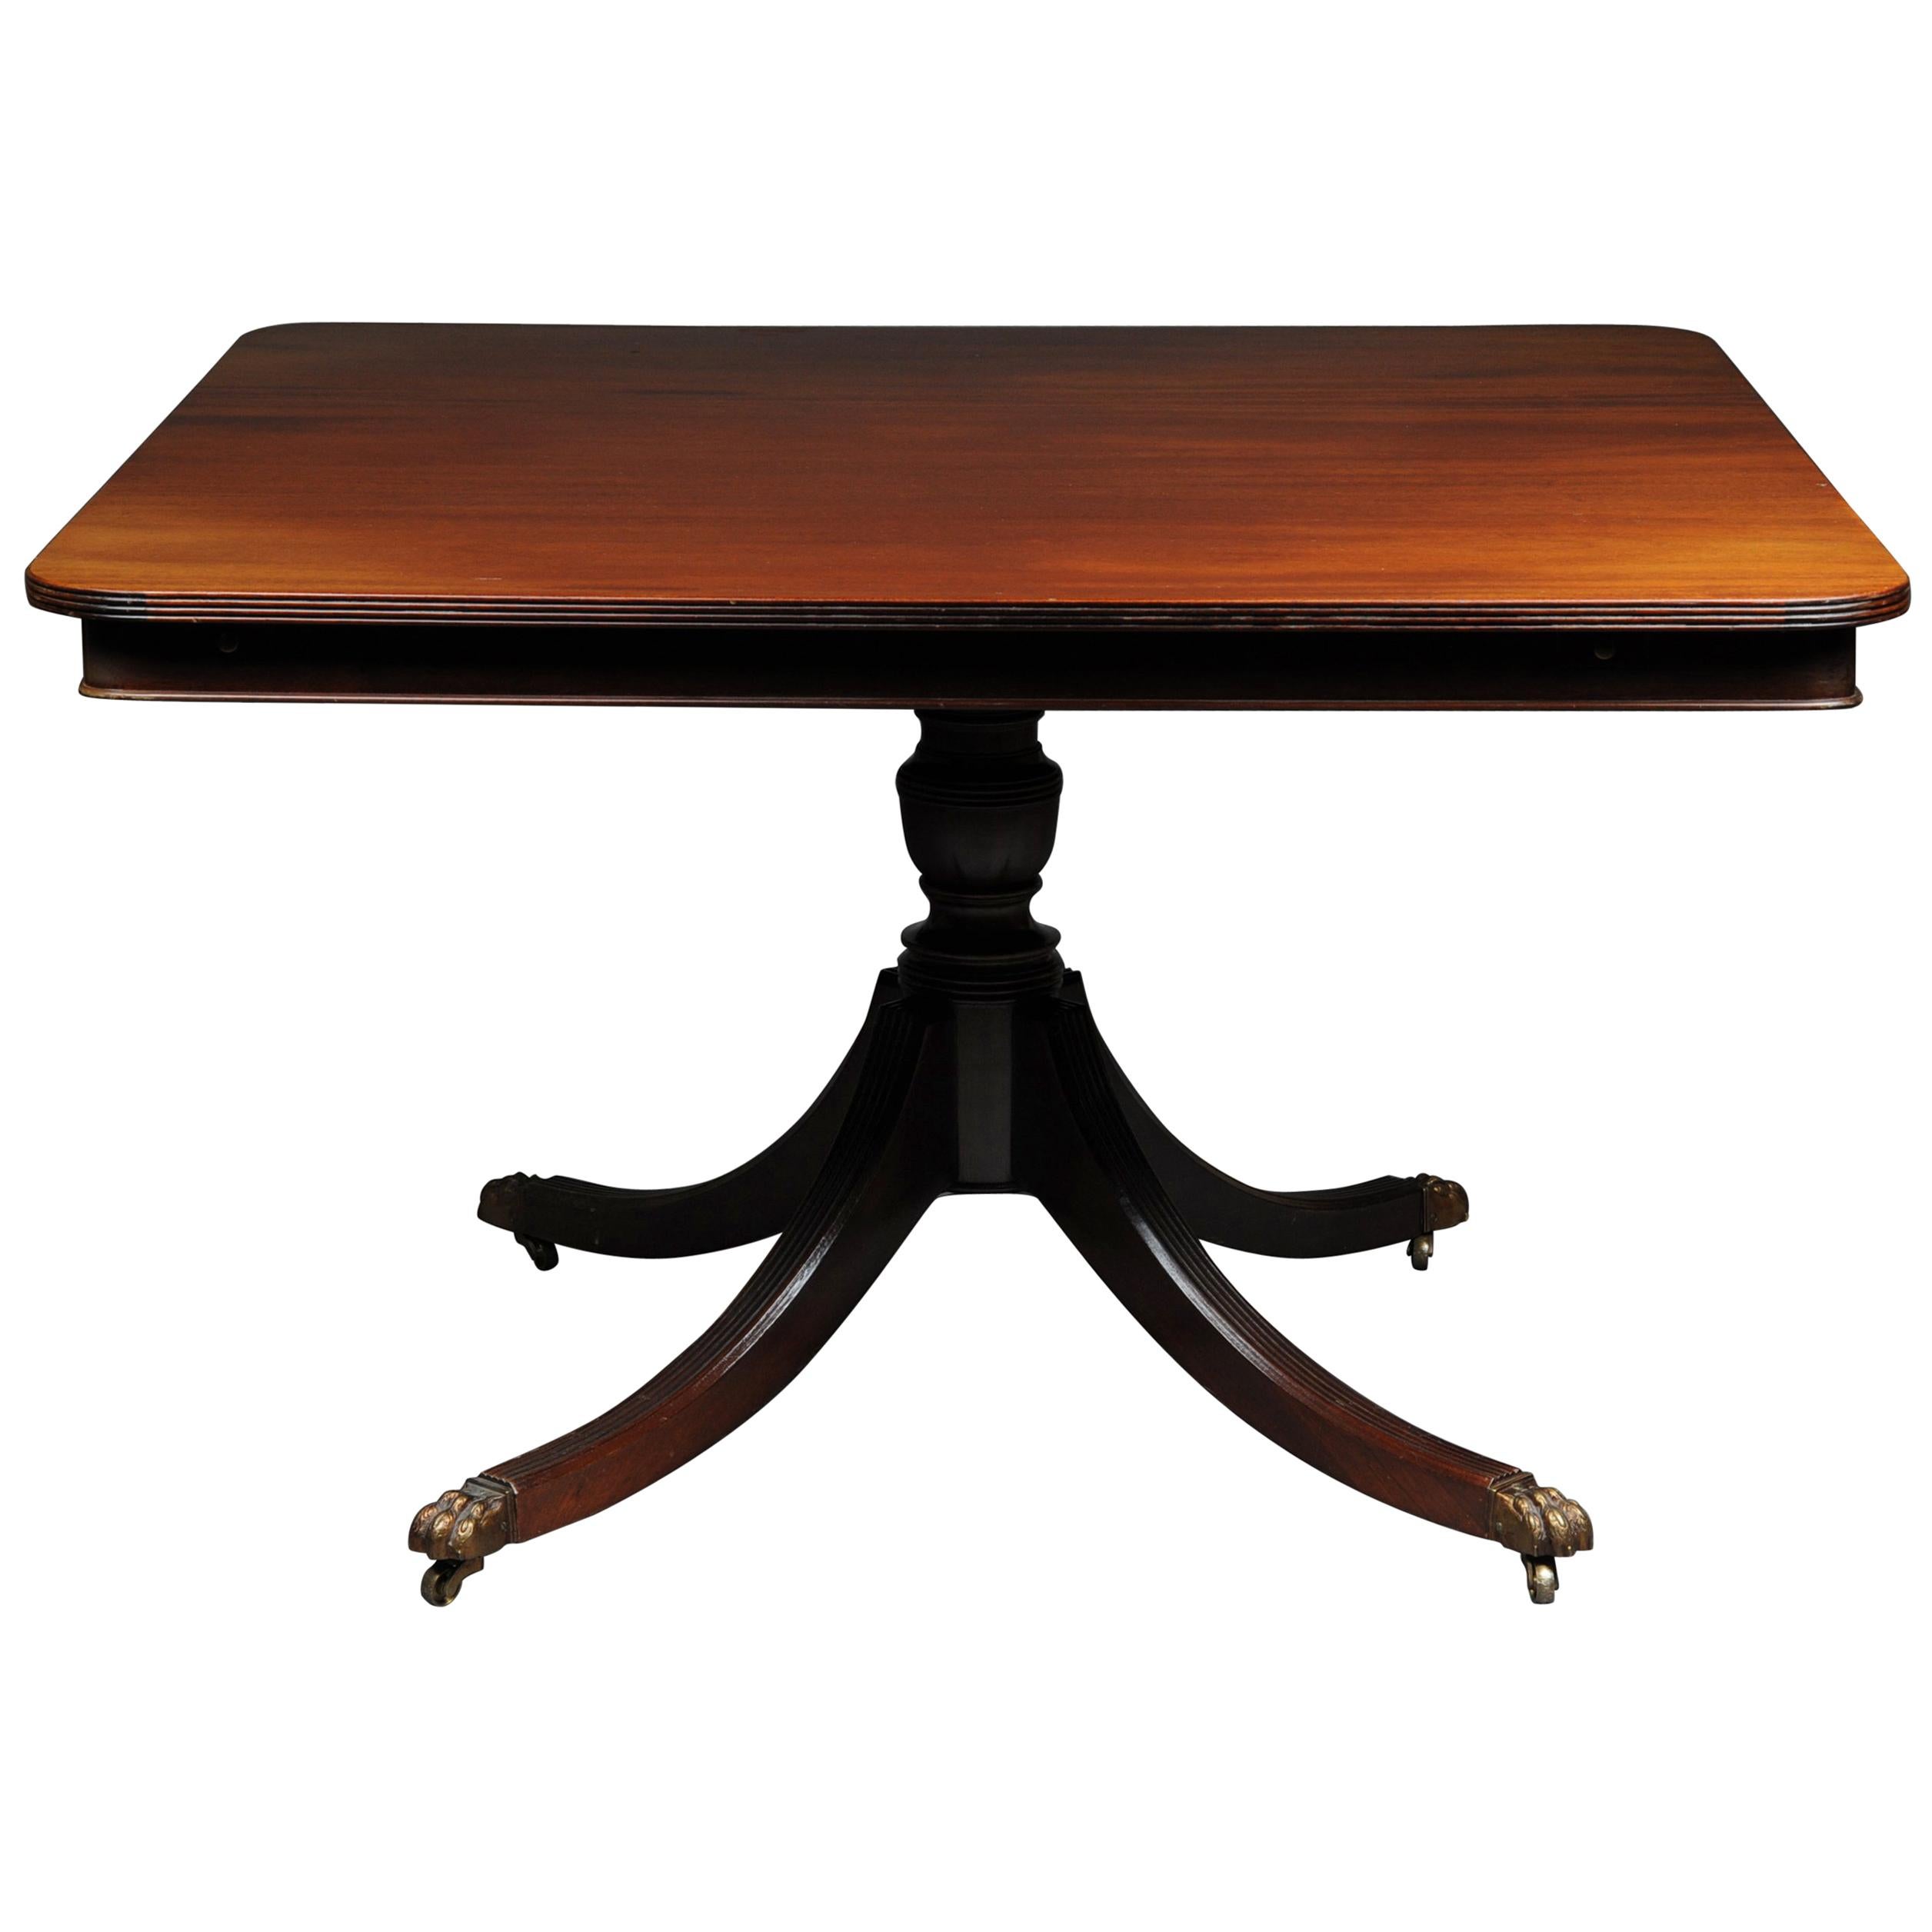 English Dining Table / Table, Mahogany, Victorian, Extendible For Sale